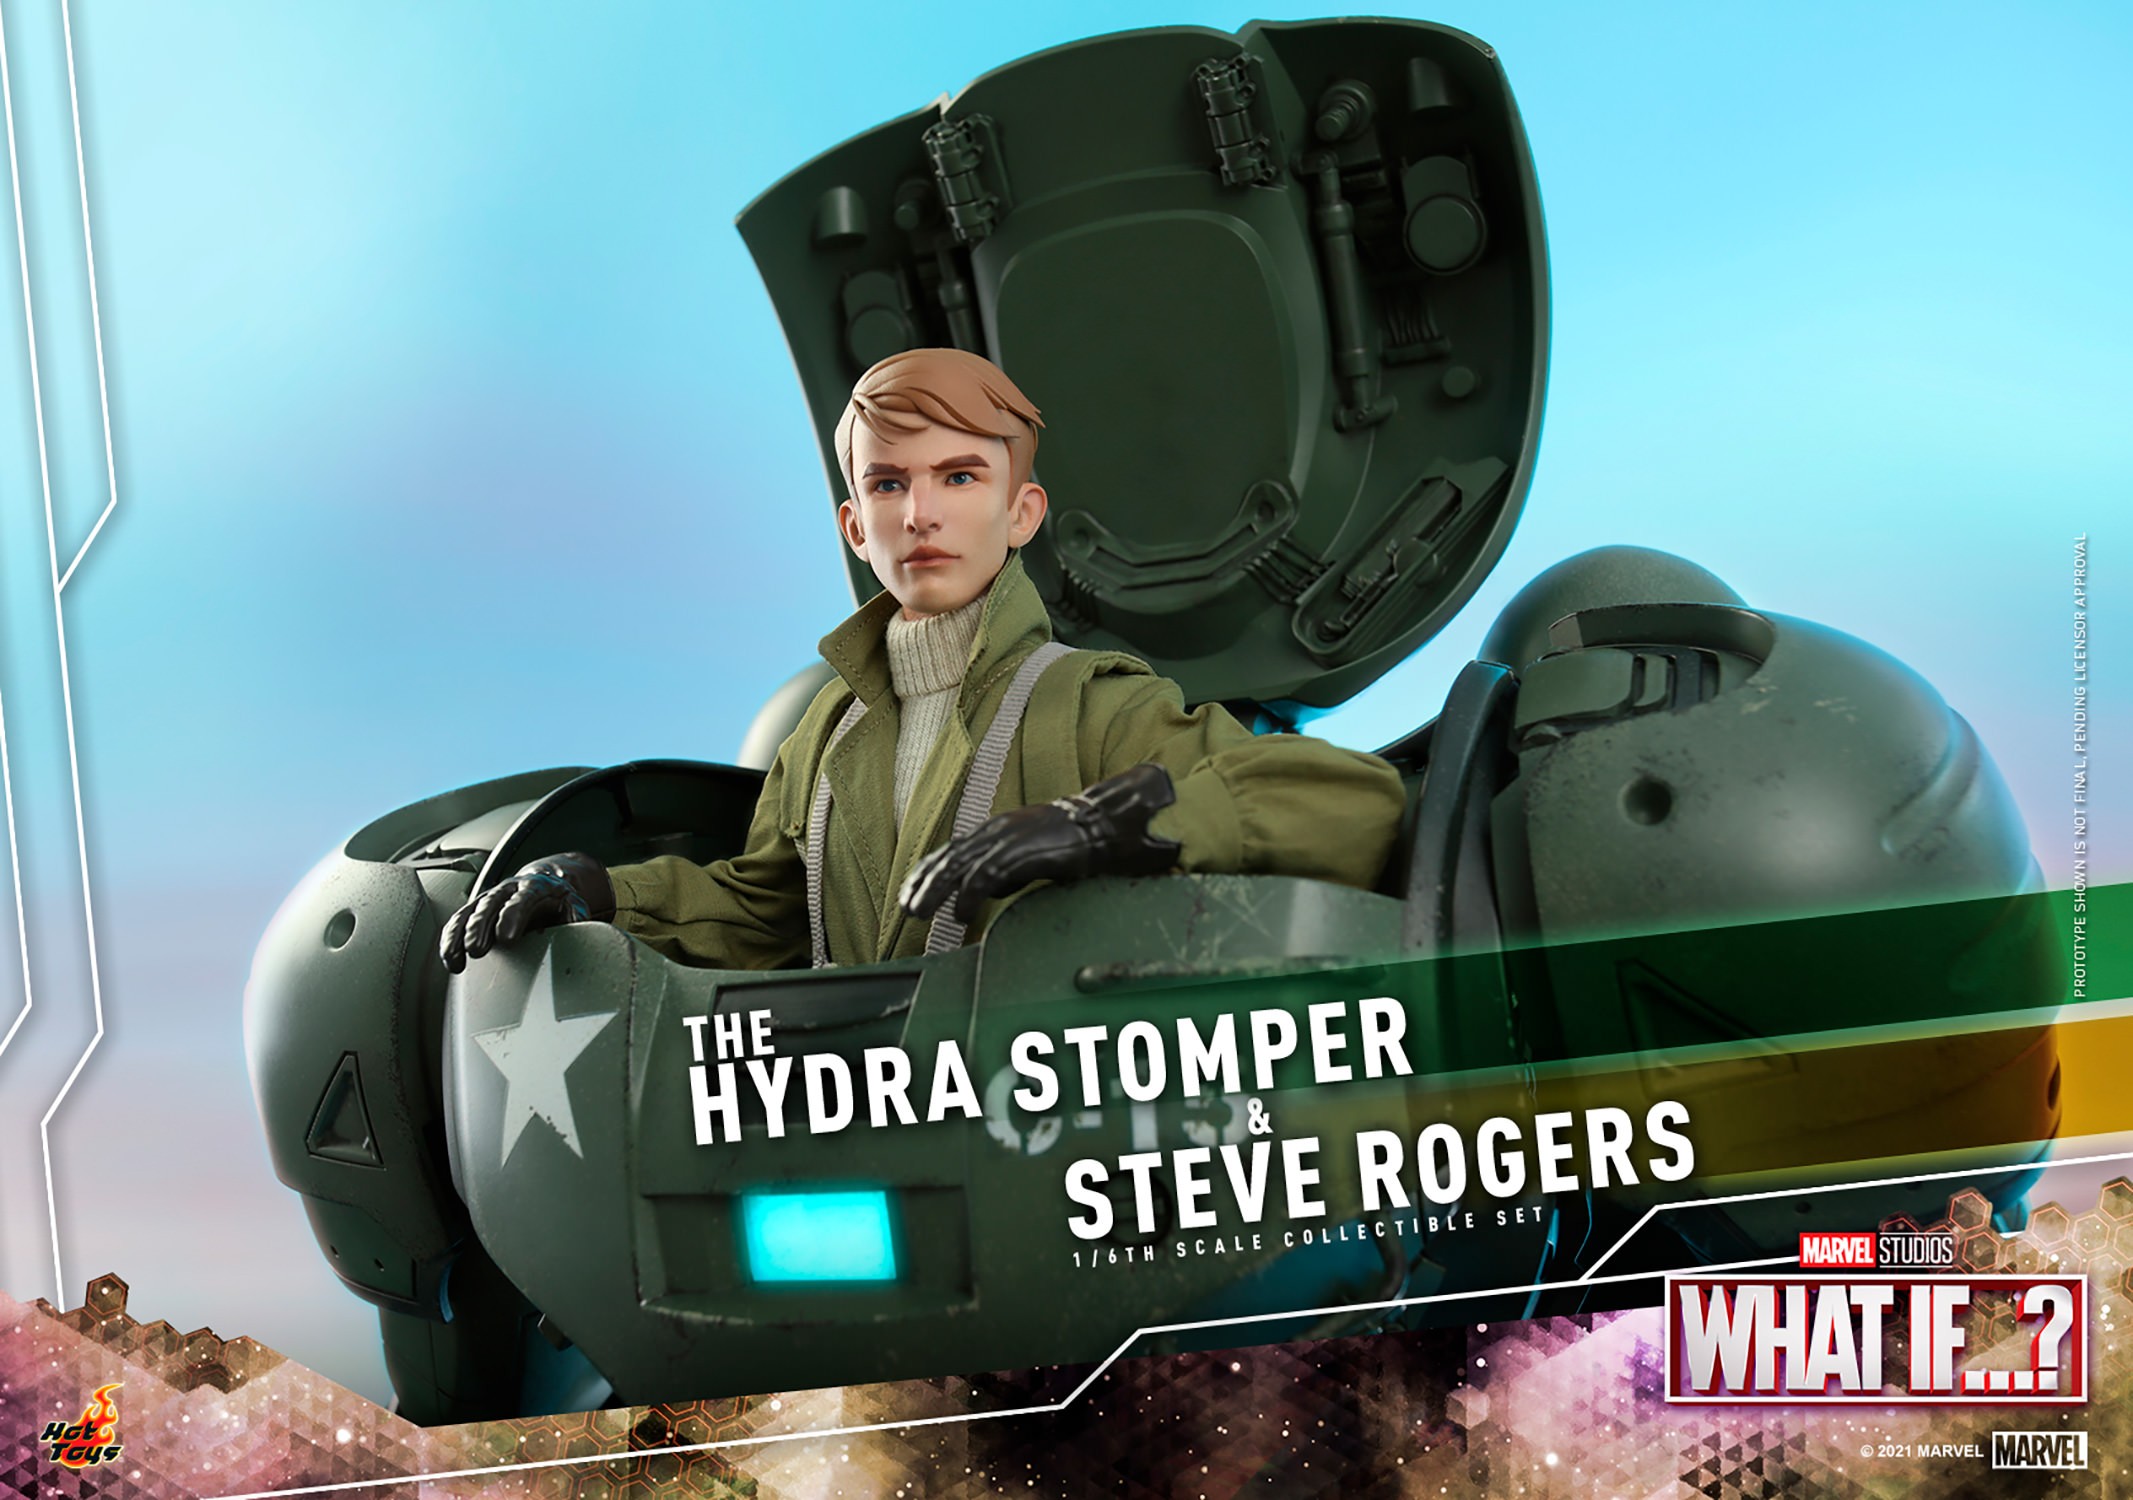 Steve Rogers and The Hydra Stomper (Prototype Shown) View 14